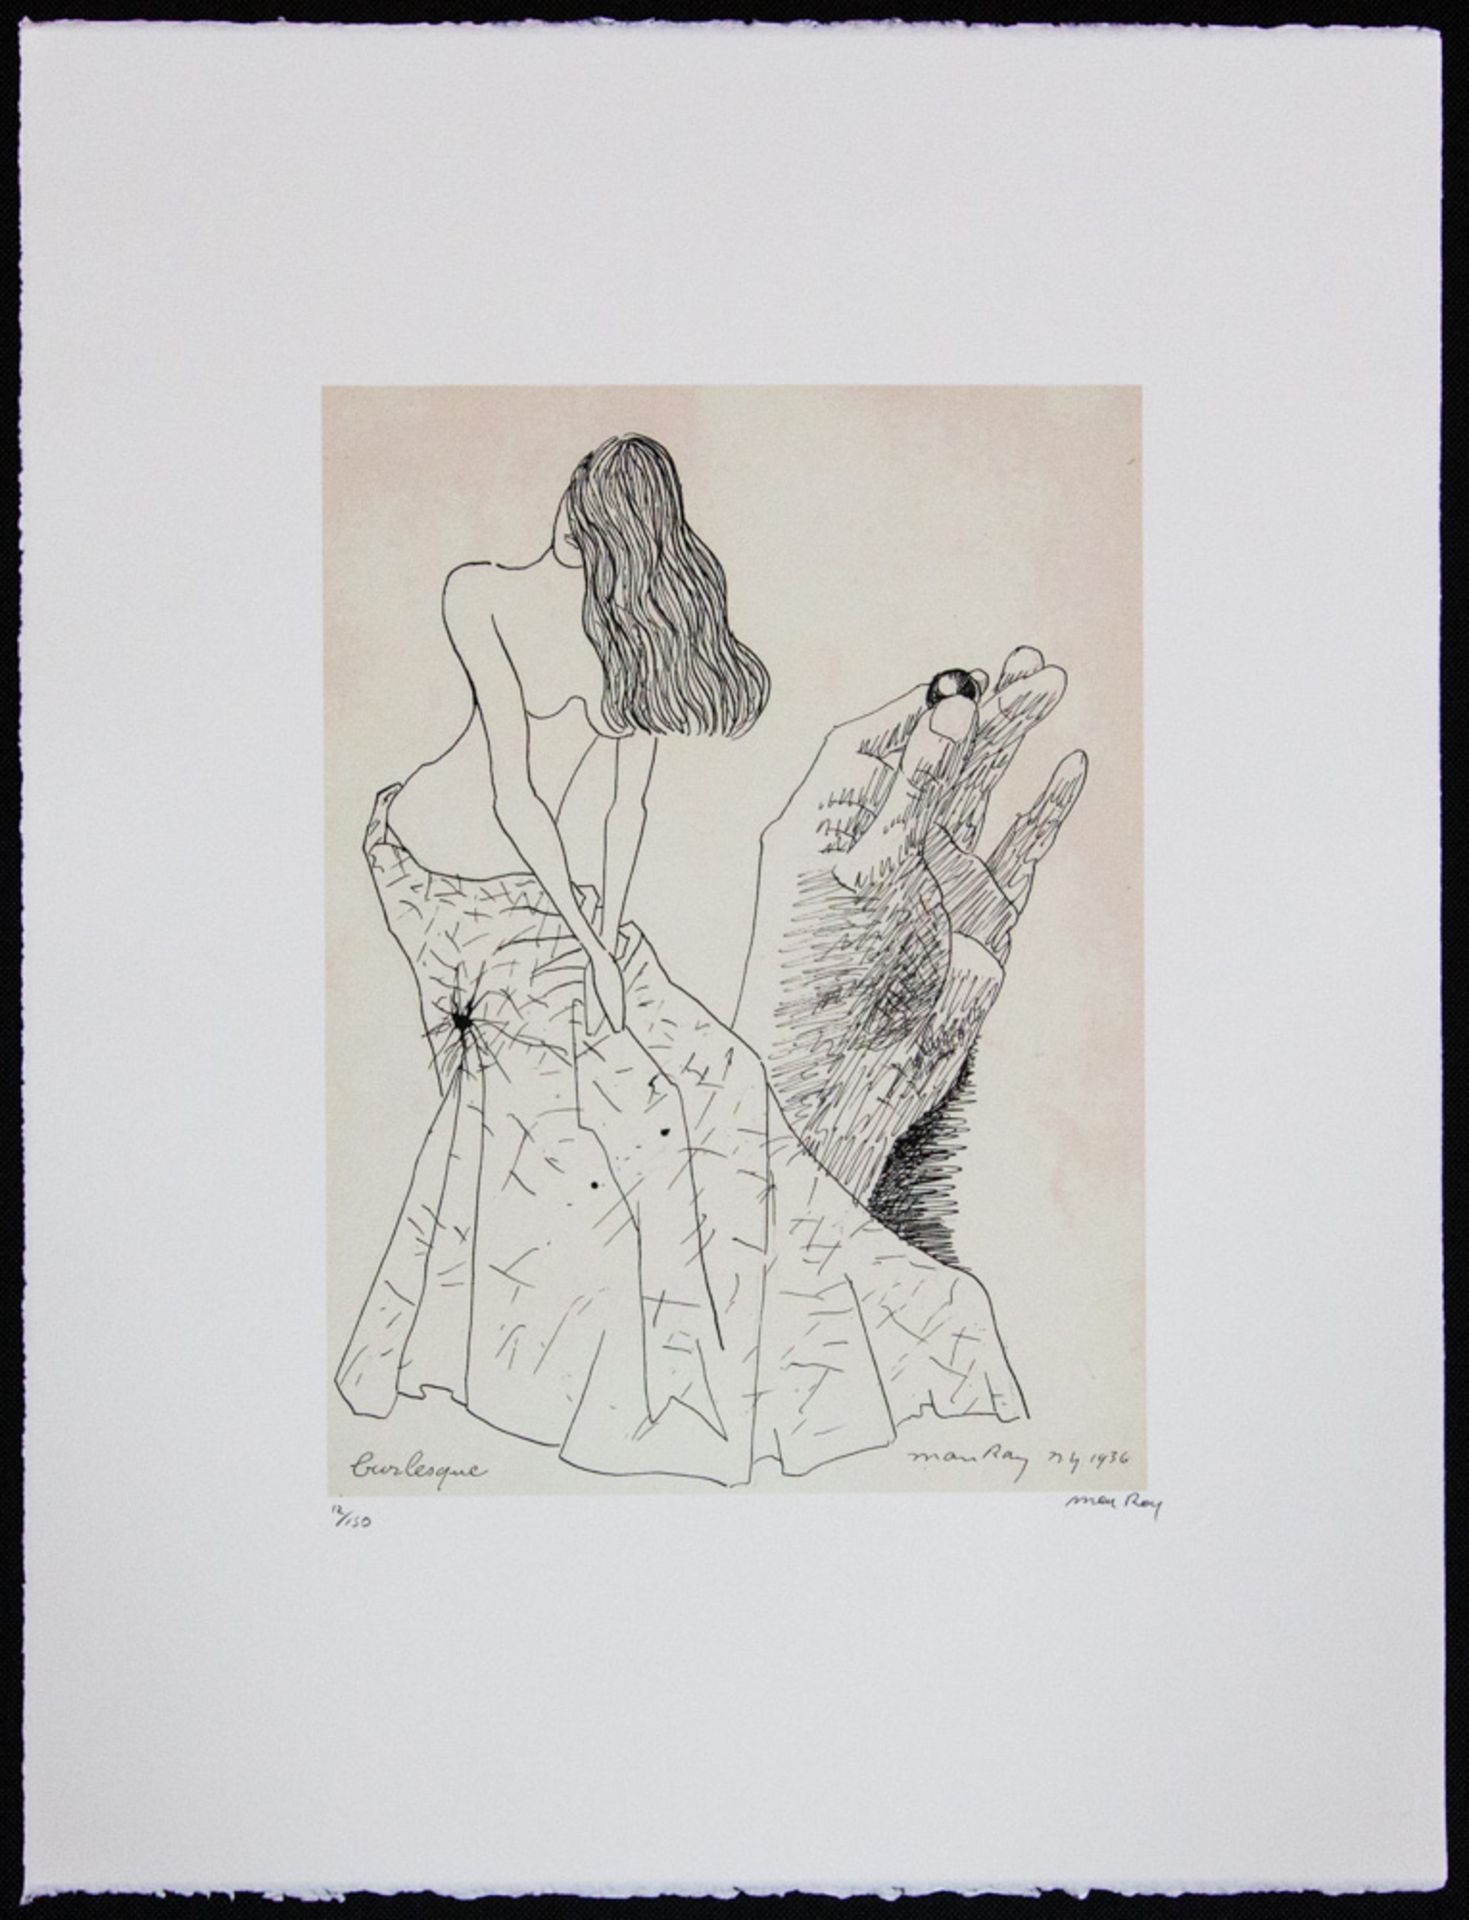 Man Ray 'Burlesque' - Image 2 of 5